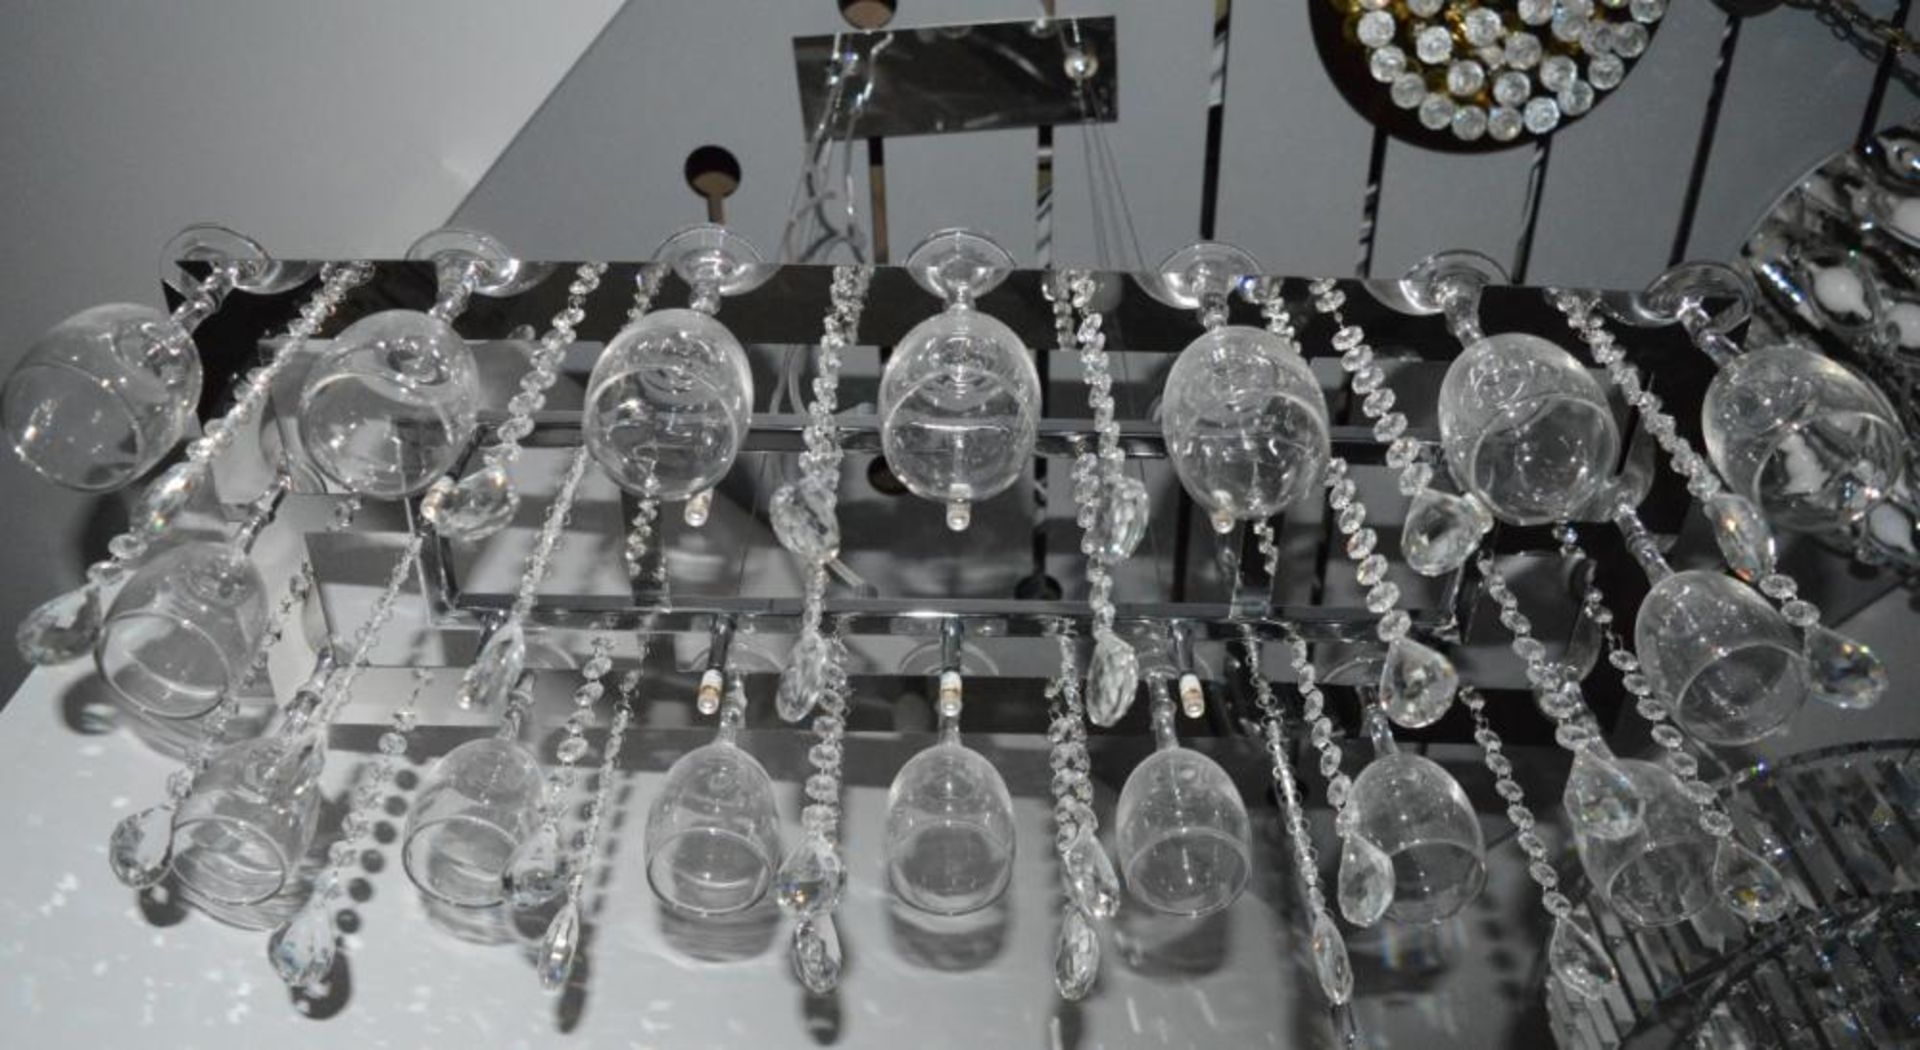 1 x Vino Chrome 10 Light Suspended Light Fitting With Crystal Button Drops and Sixteen Wine Glasses - Image 5 of 7